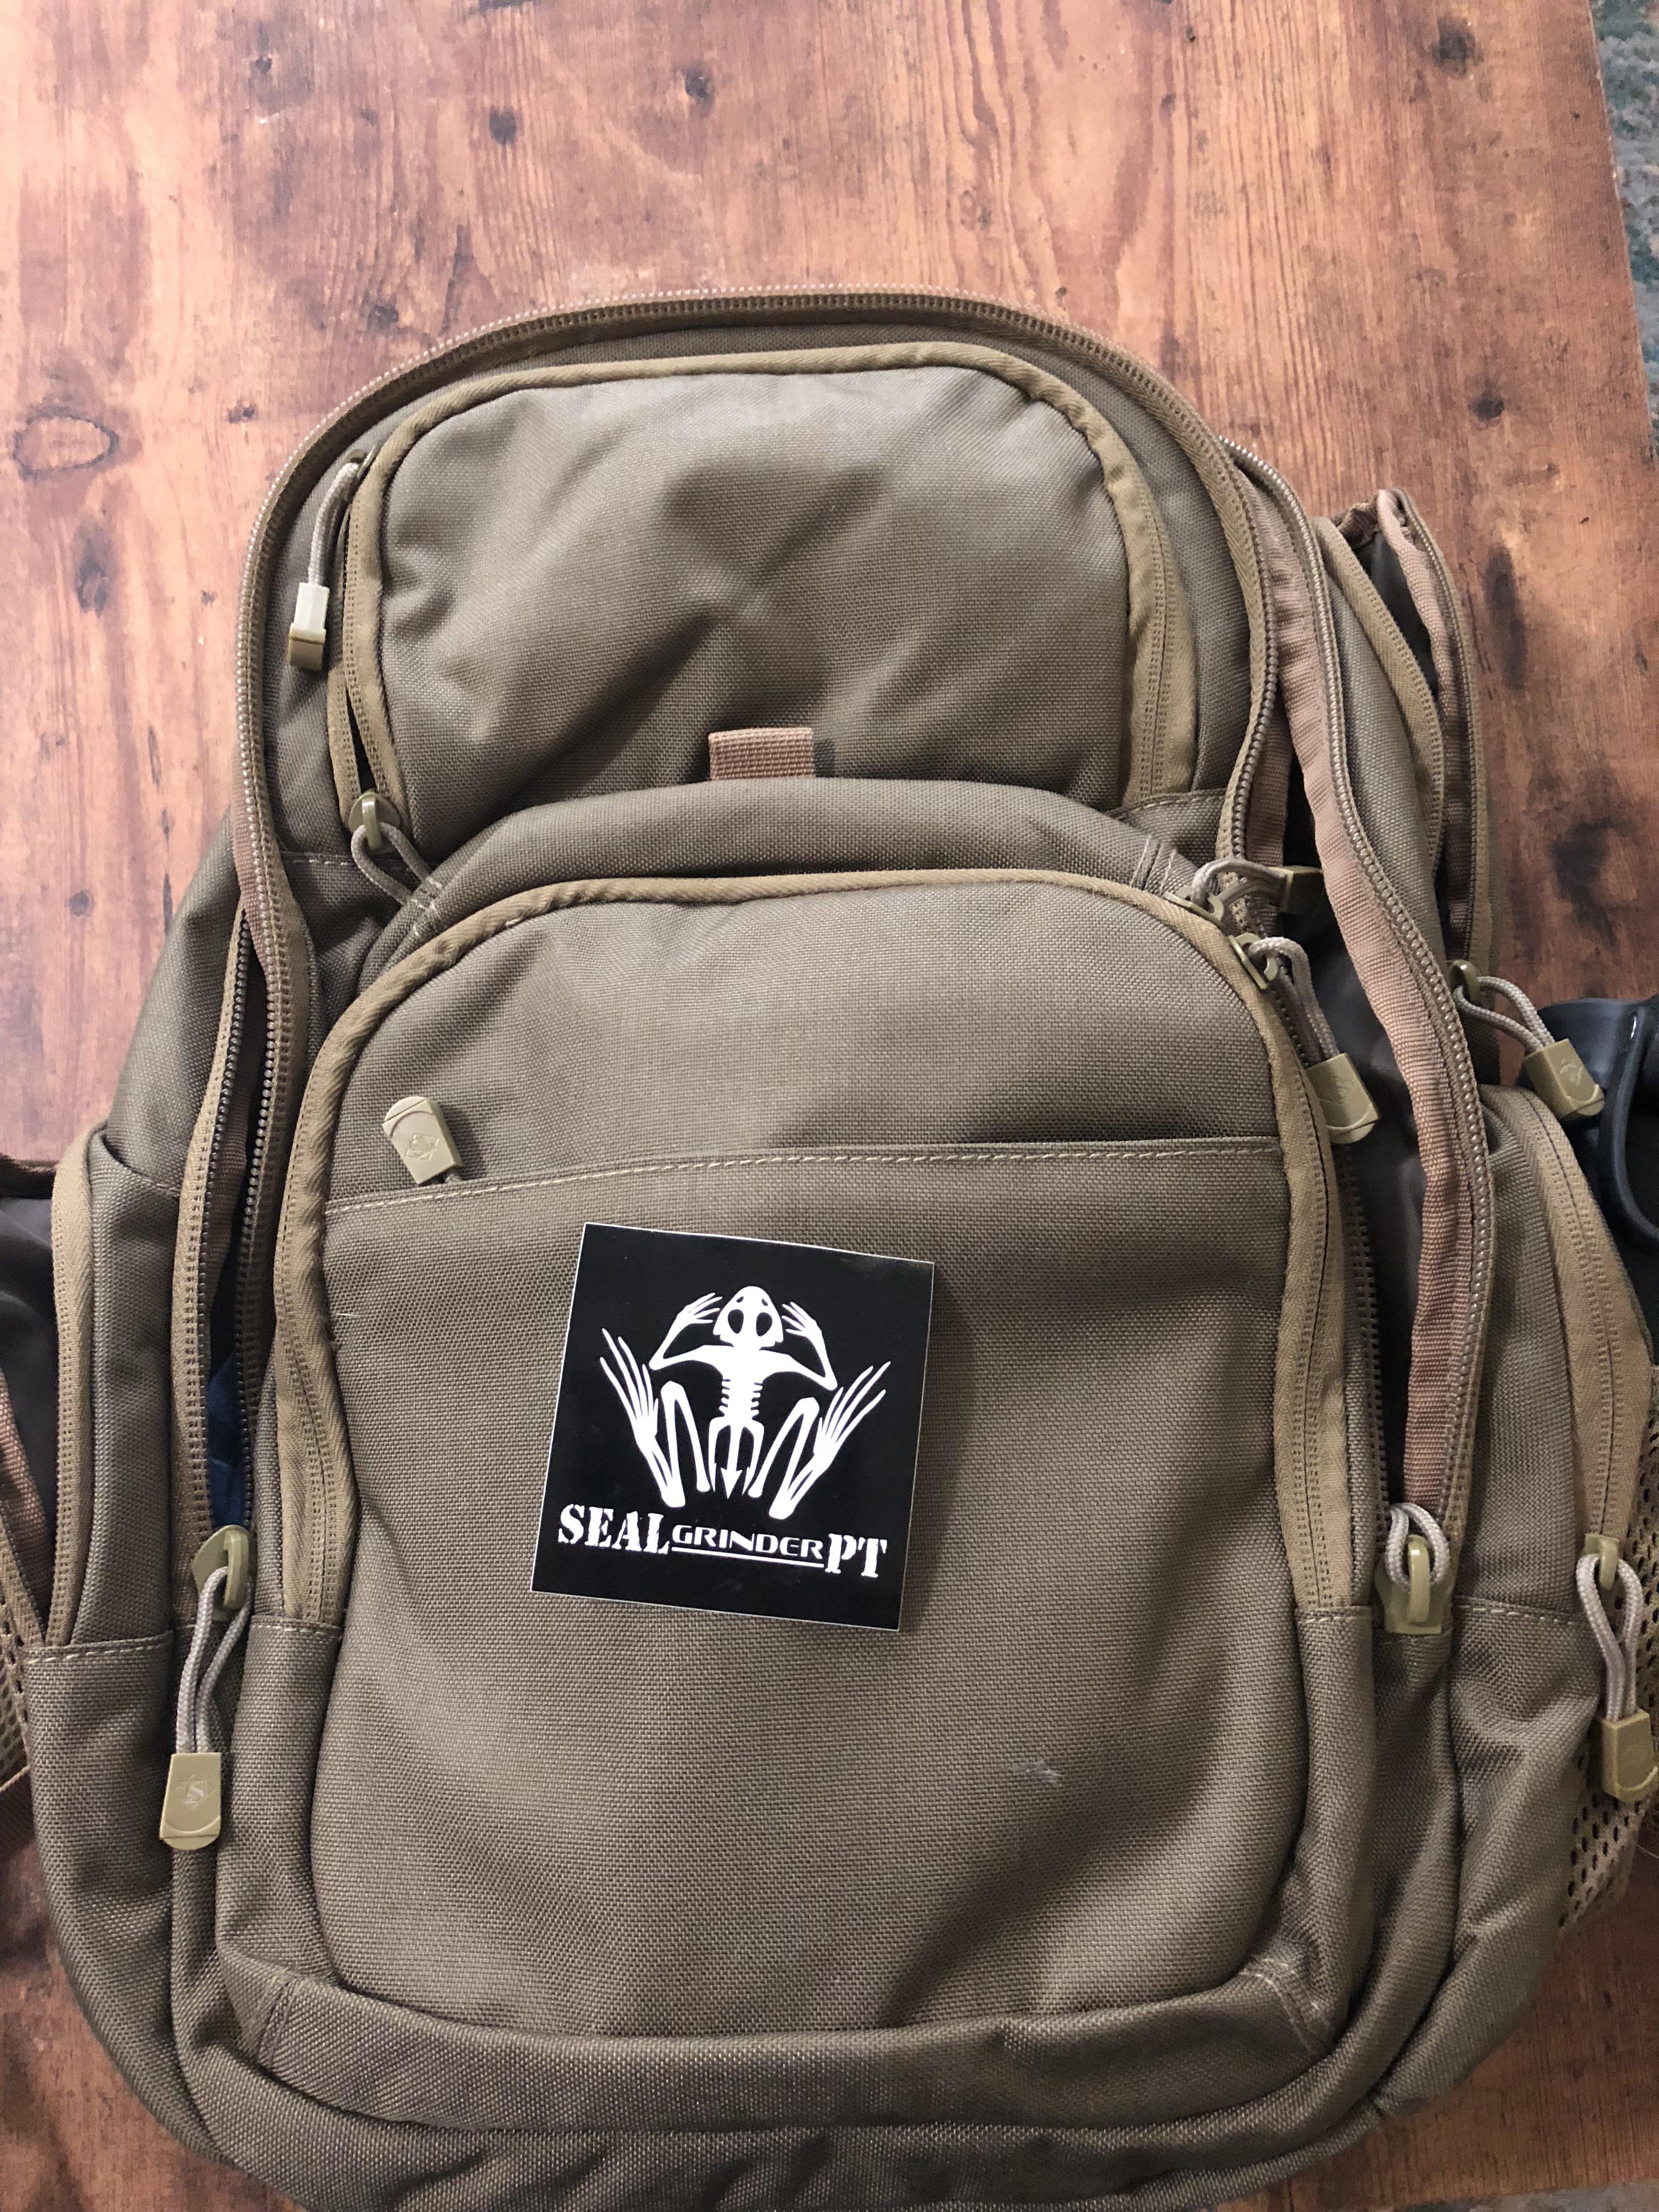 Featured image for “Gear Review: TruSpec Stealth Backpack”